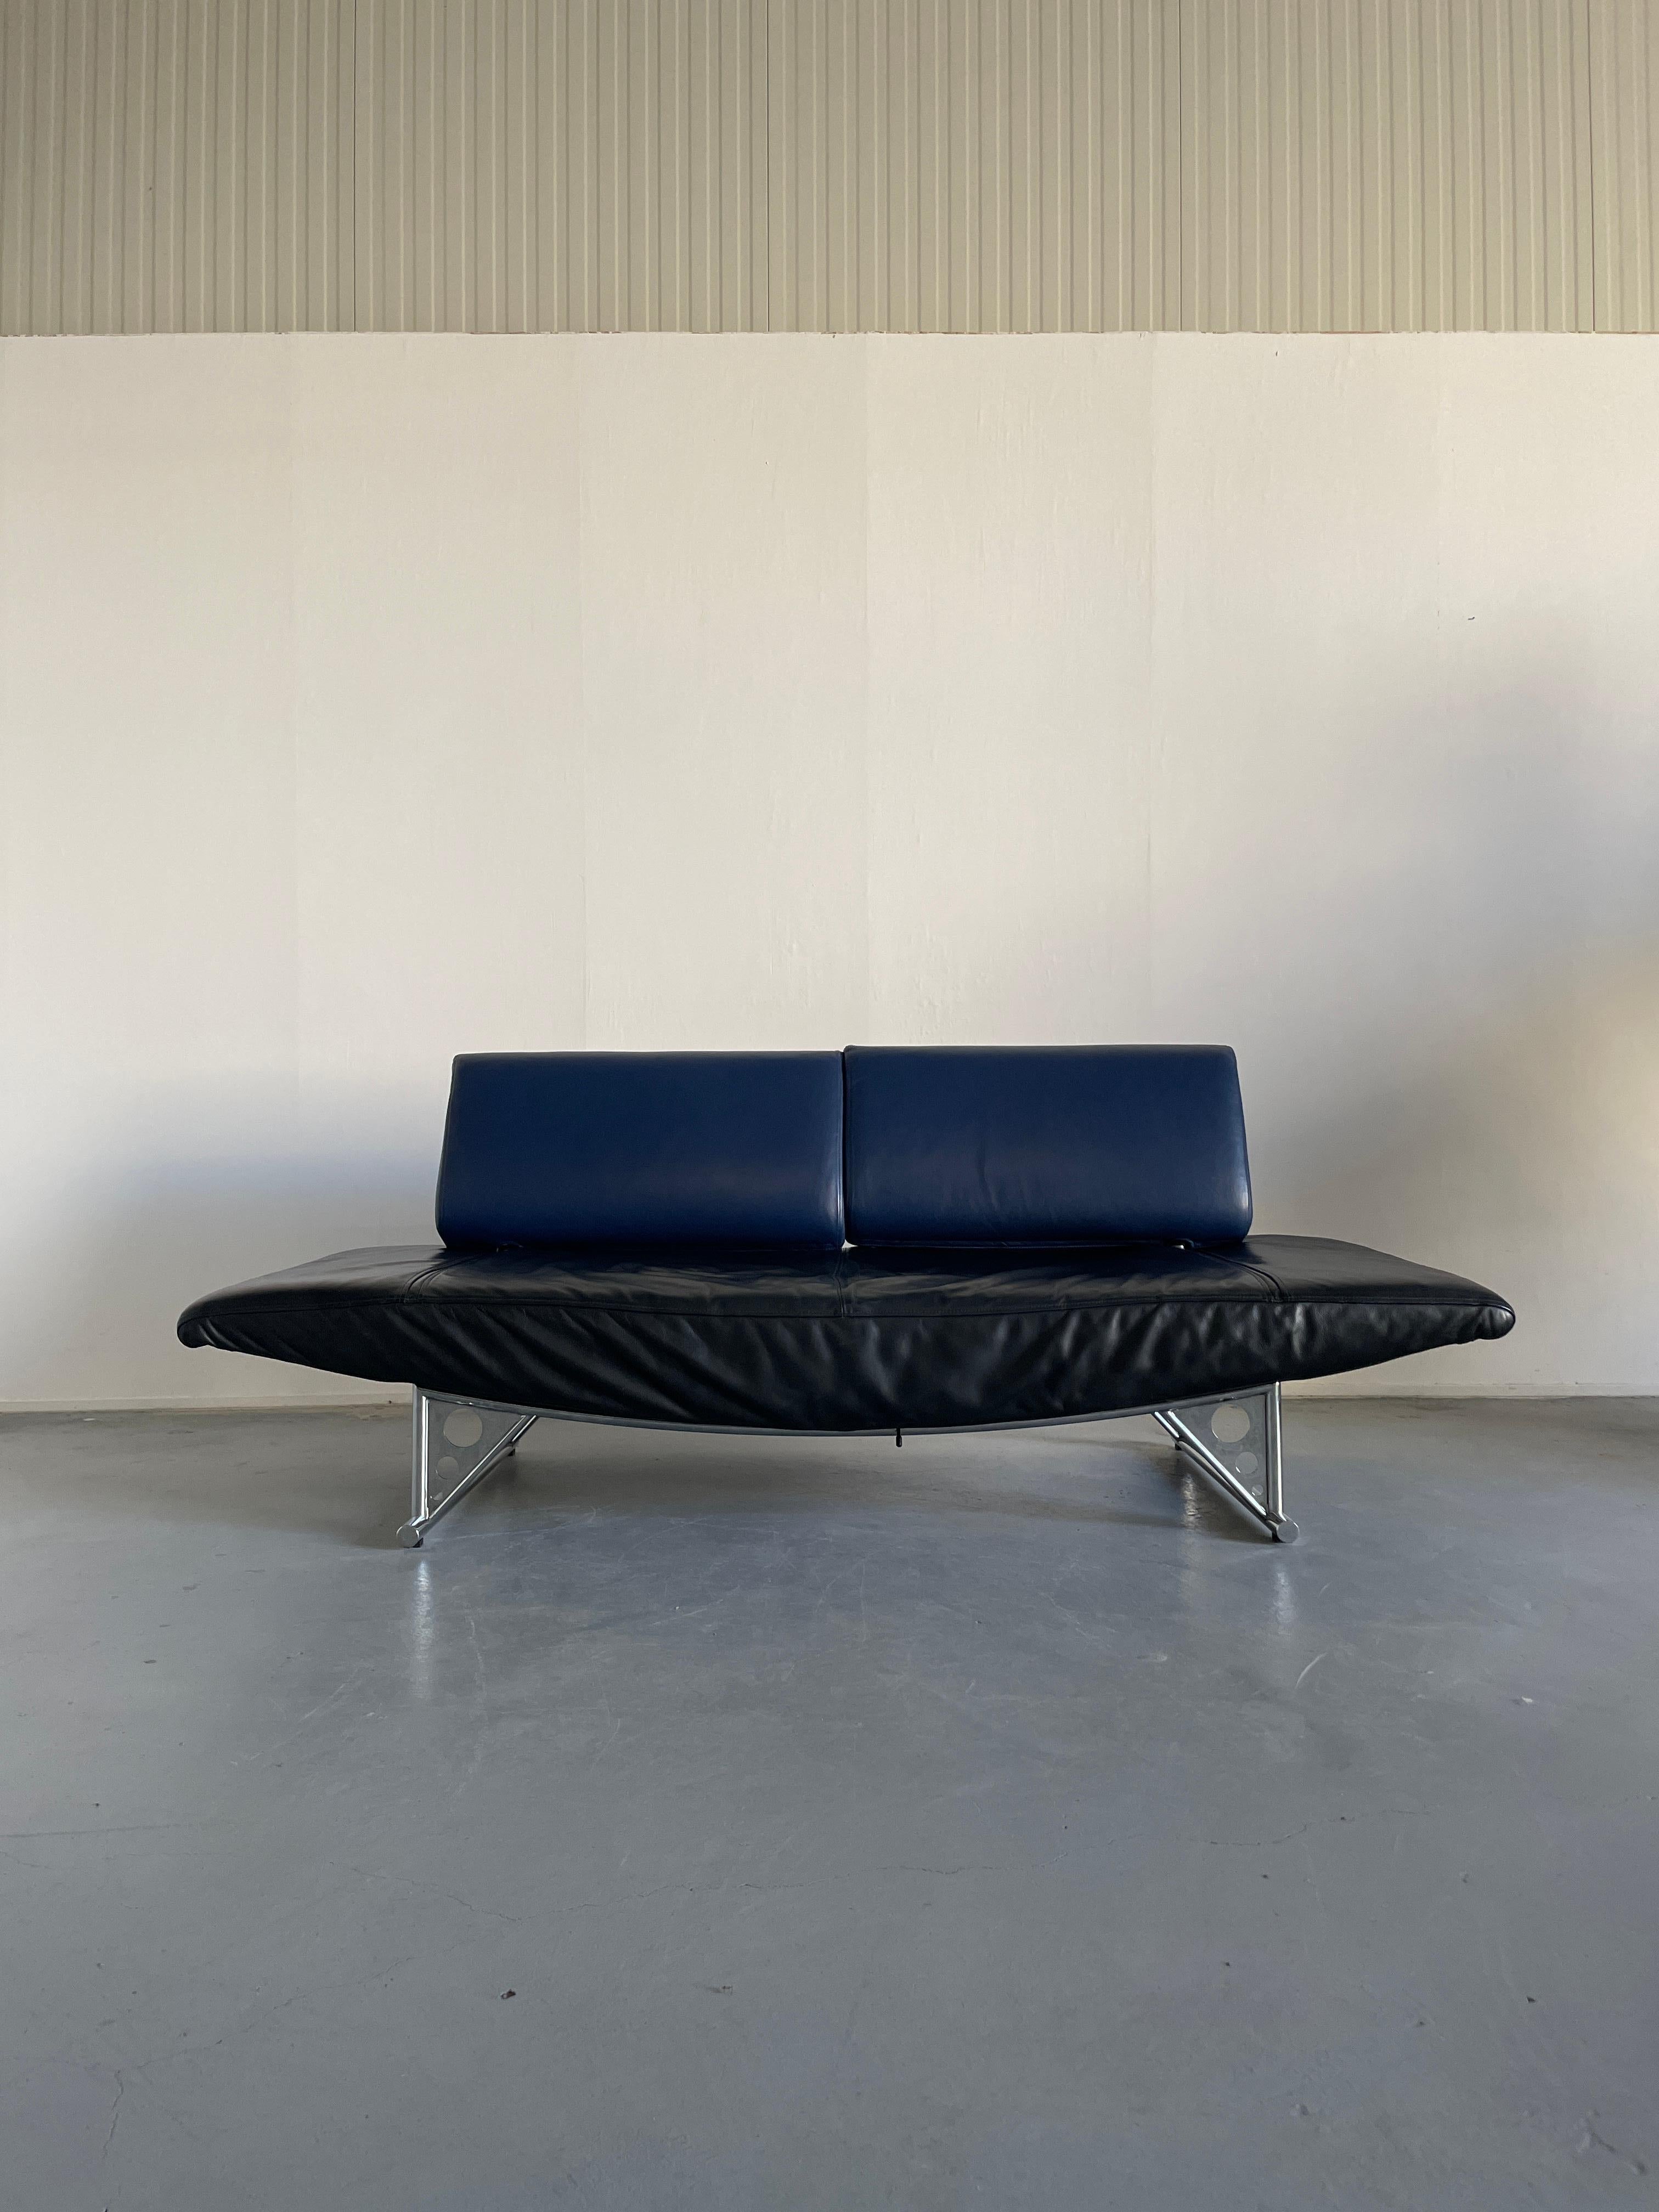 'Cirrus', a postmodern loveseat two-seater sofa designed by Peter Maly and produced by the famous German furniture manufacturer COR.
Black and blue leather edition with the triangle chrome metal base.
The back cushions can be rotated and swiveled,